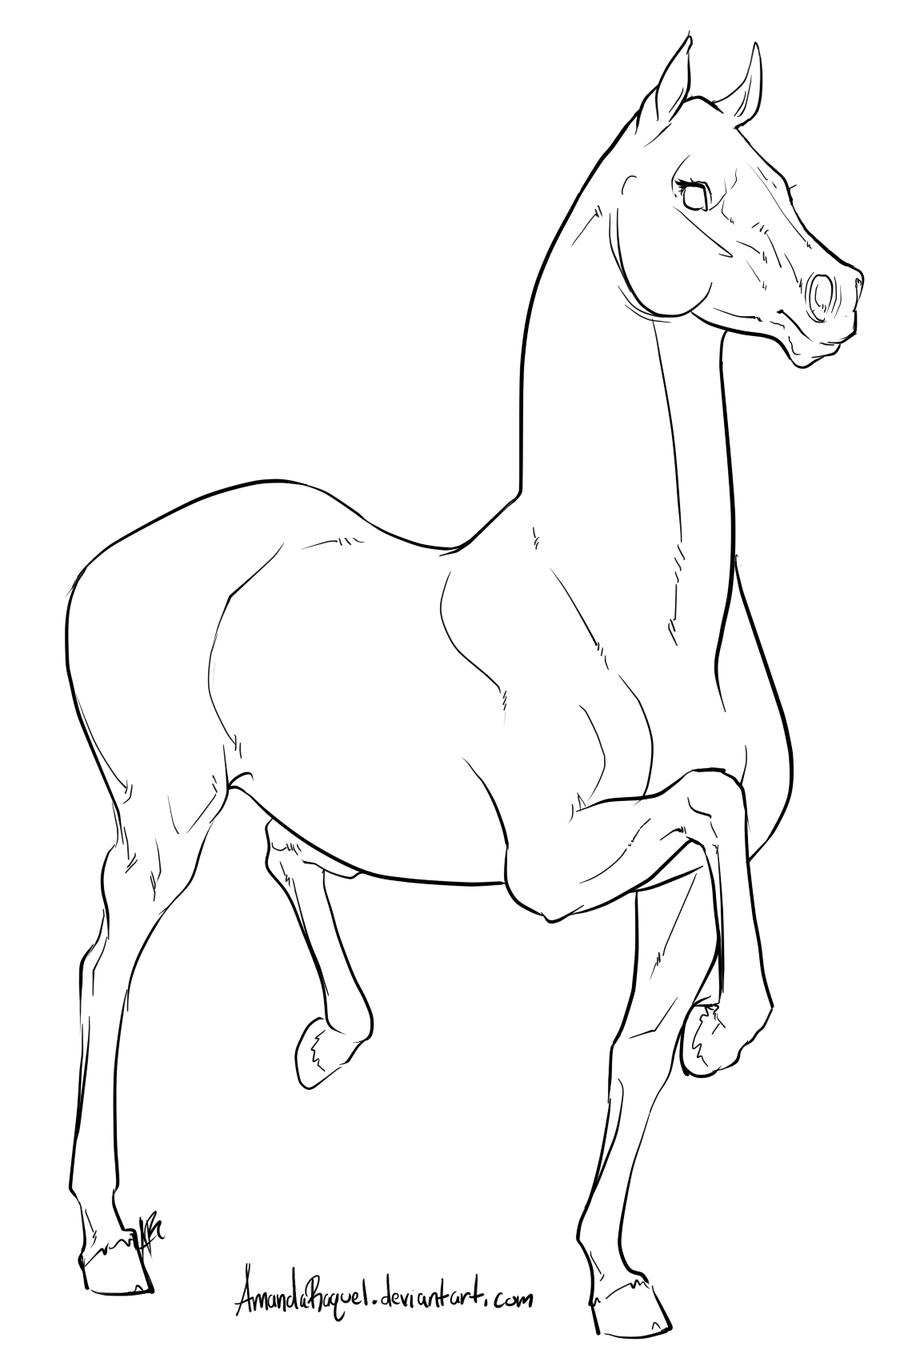 0 images about horse lineart on arabian horses 2